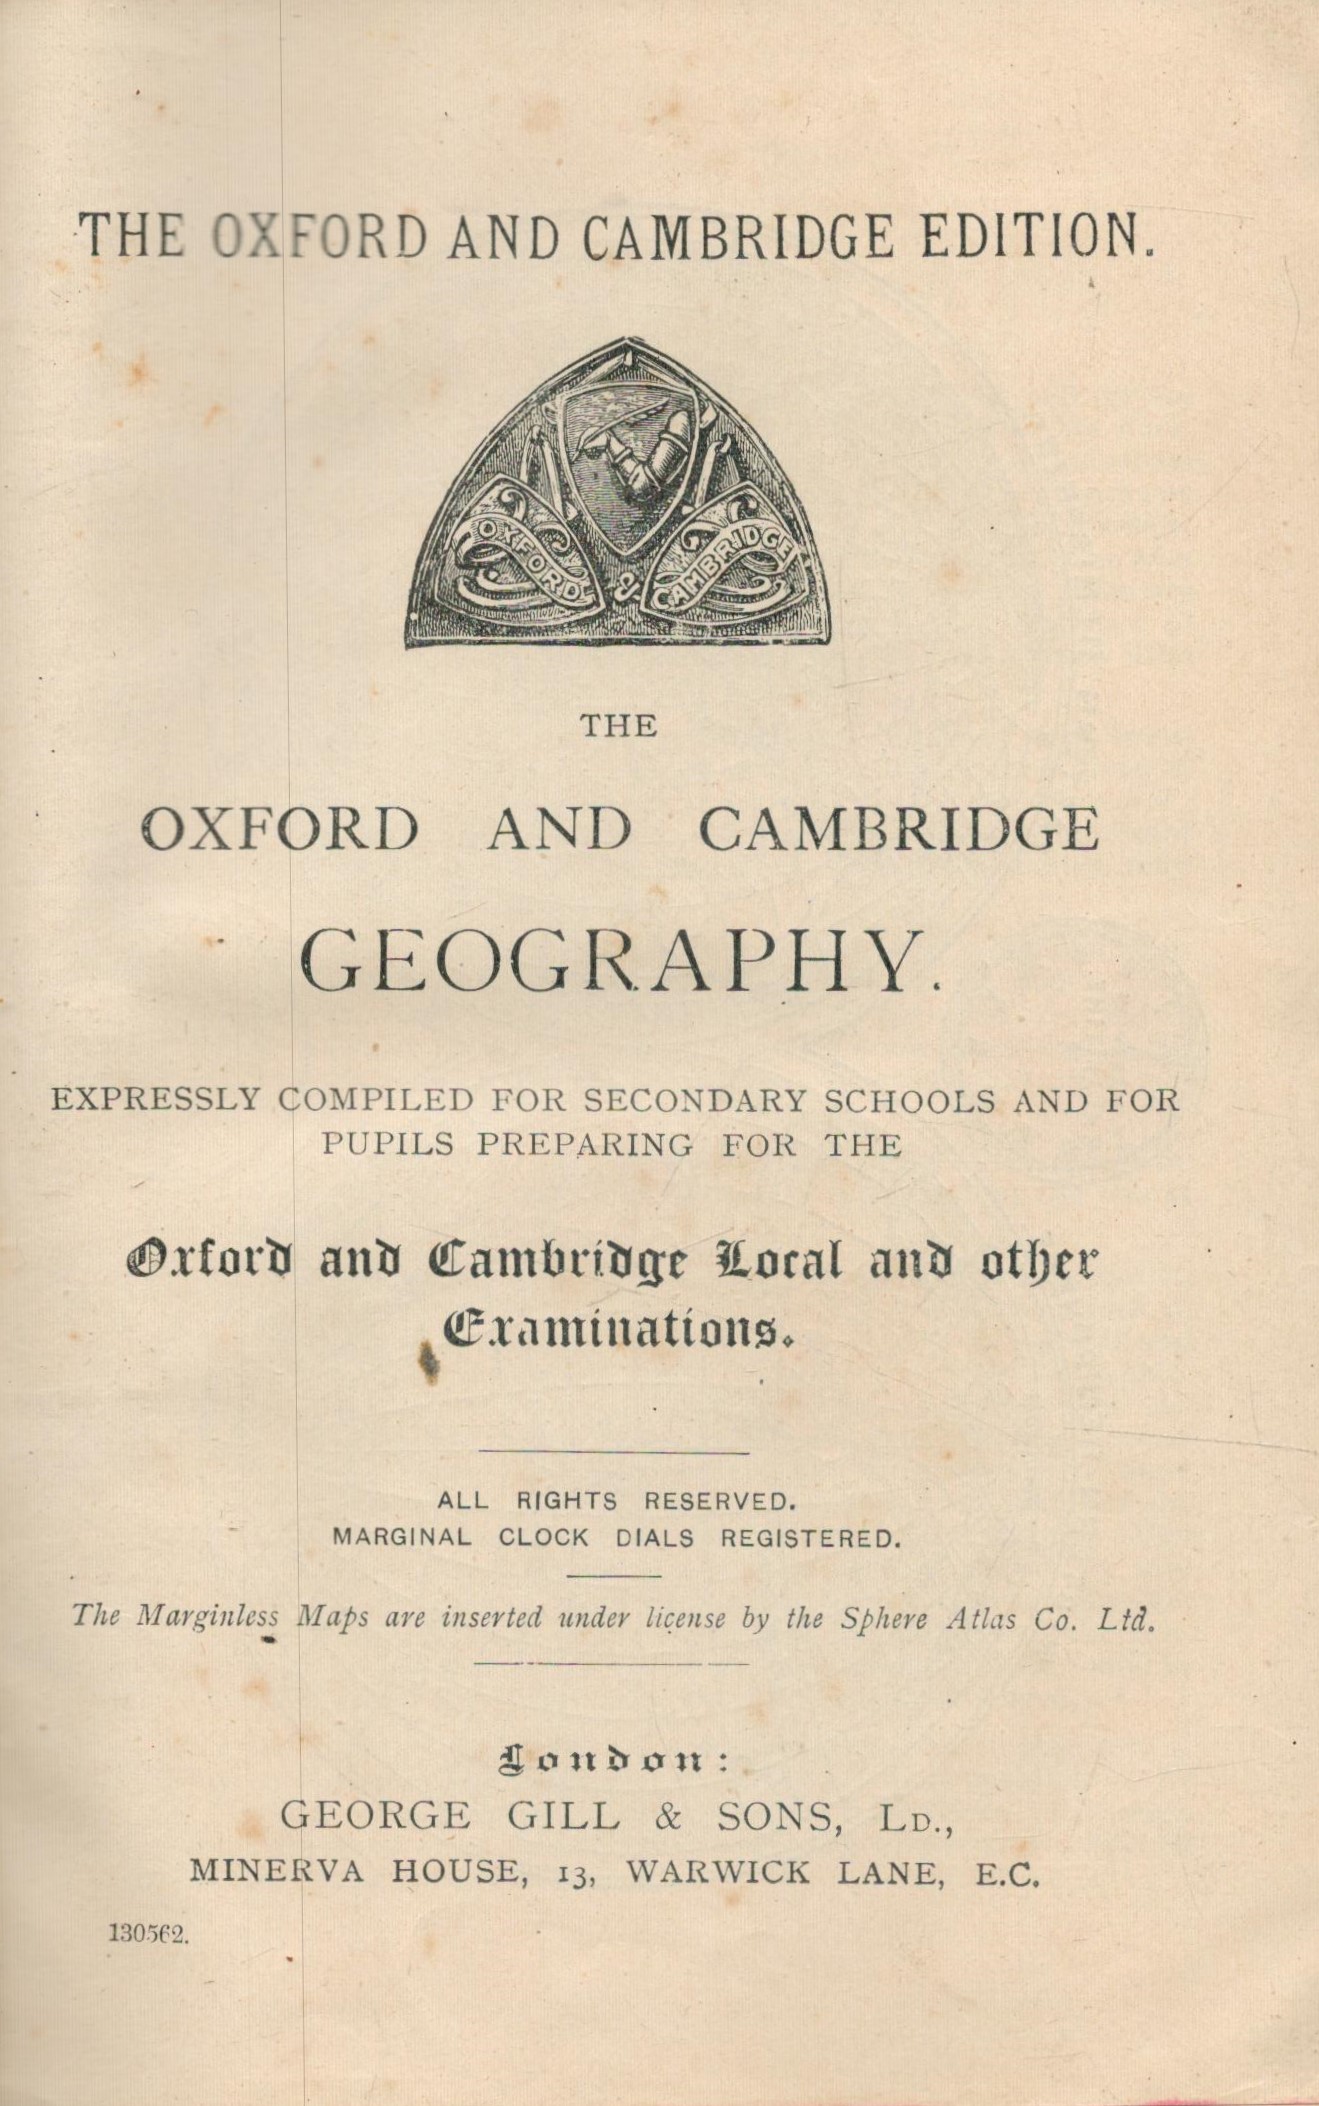 The Oxford and Cambridge Edition of Oxford and Cambridge Geography. For Oxford and Cambridge and - Image 2 of 2